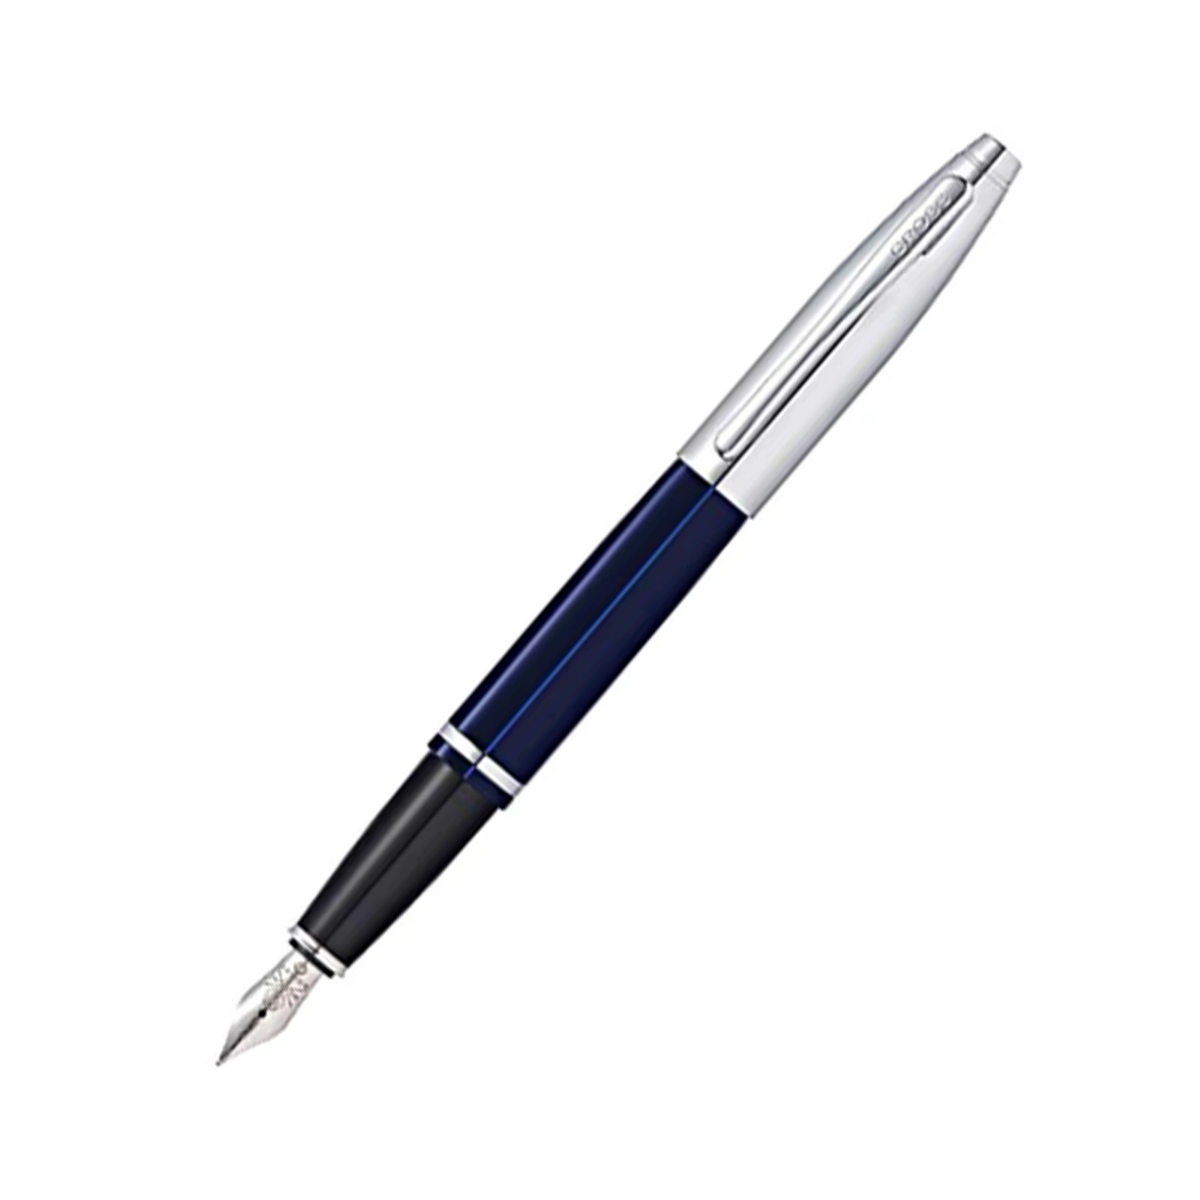 Cross AT0116 - 3MS Model:17705 Calais Polished Chrome And Blue Color Body With Medium Nib Fountain Pen